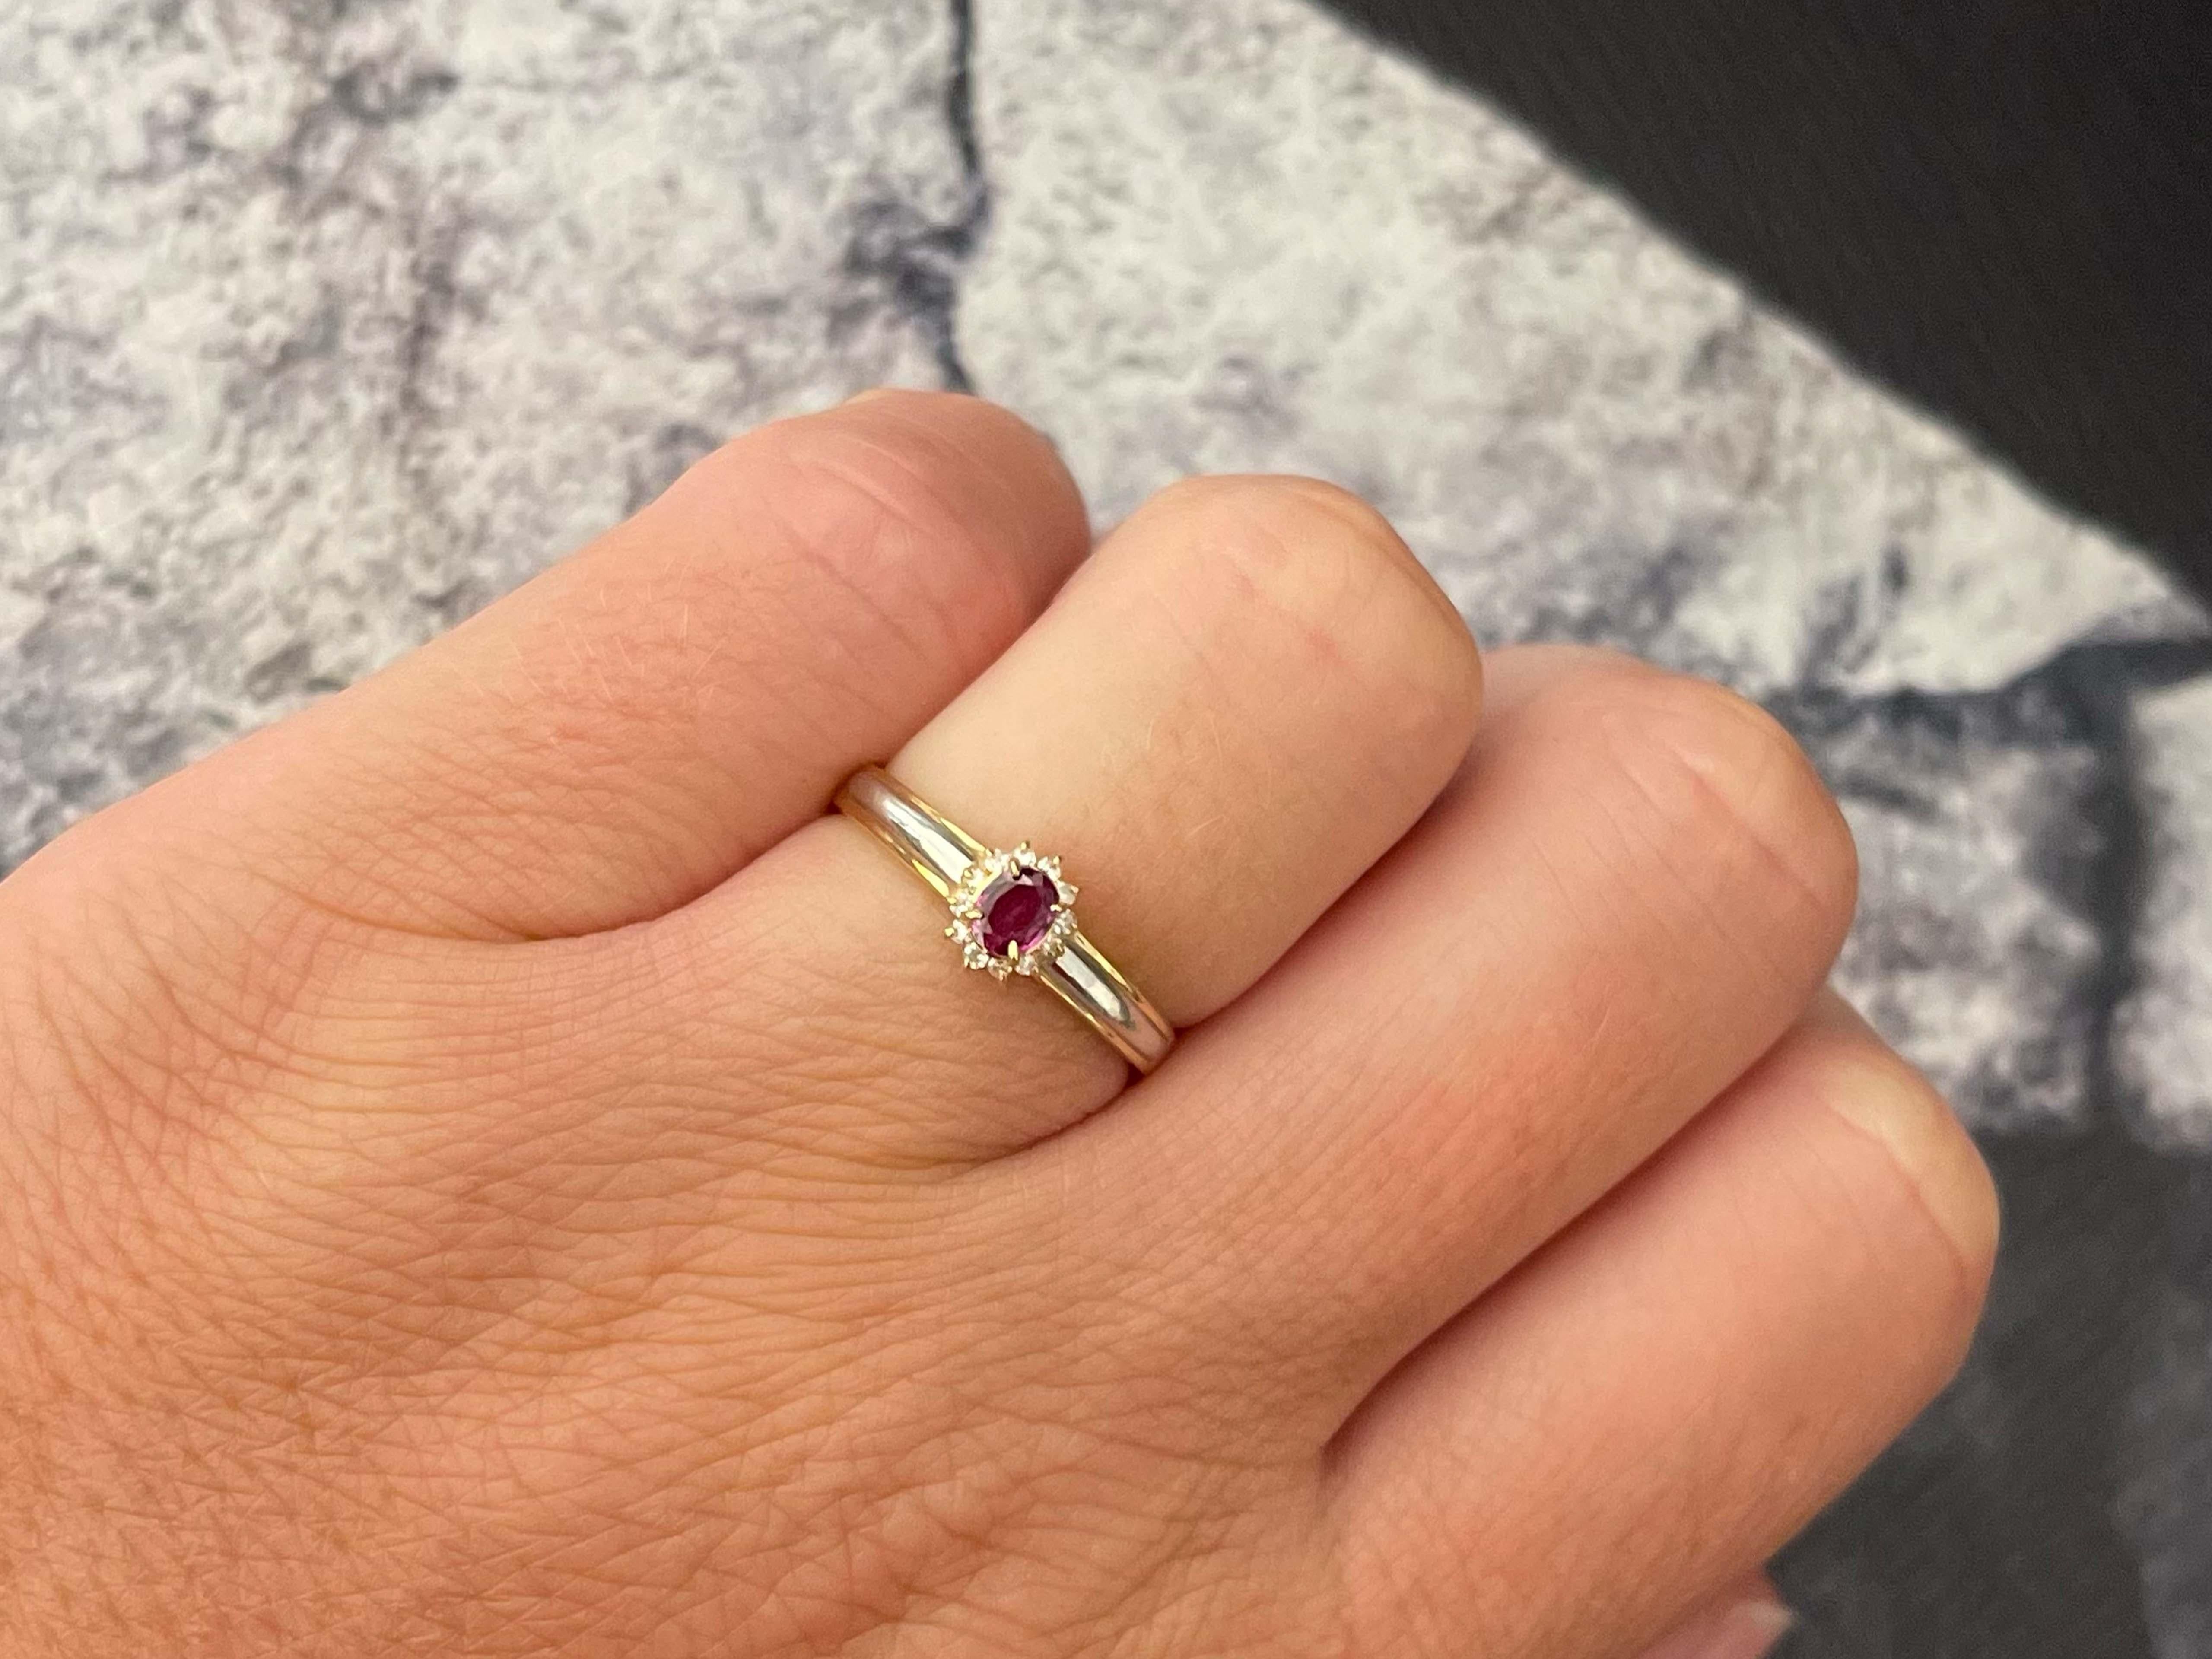 Item Specifications:

Metal: 18k Yellow Gold & Platinum

Style: Statement Ring

Ring Size: 6.25 (resizing available for a fee)

Total Weight: 2.0 Grams

Gemstone Specifications:

Gemstones: 1 red ruby

Ruby Carat Weight: 0.16 carats

Diamond Carat